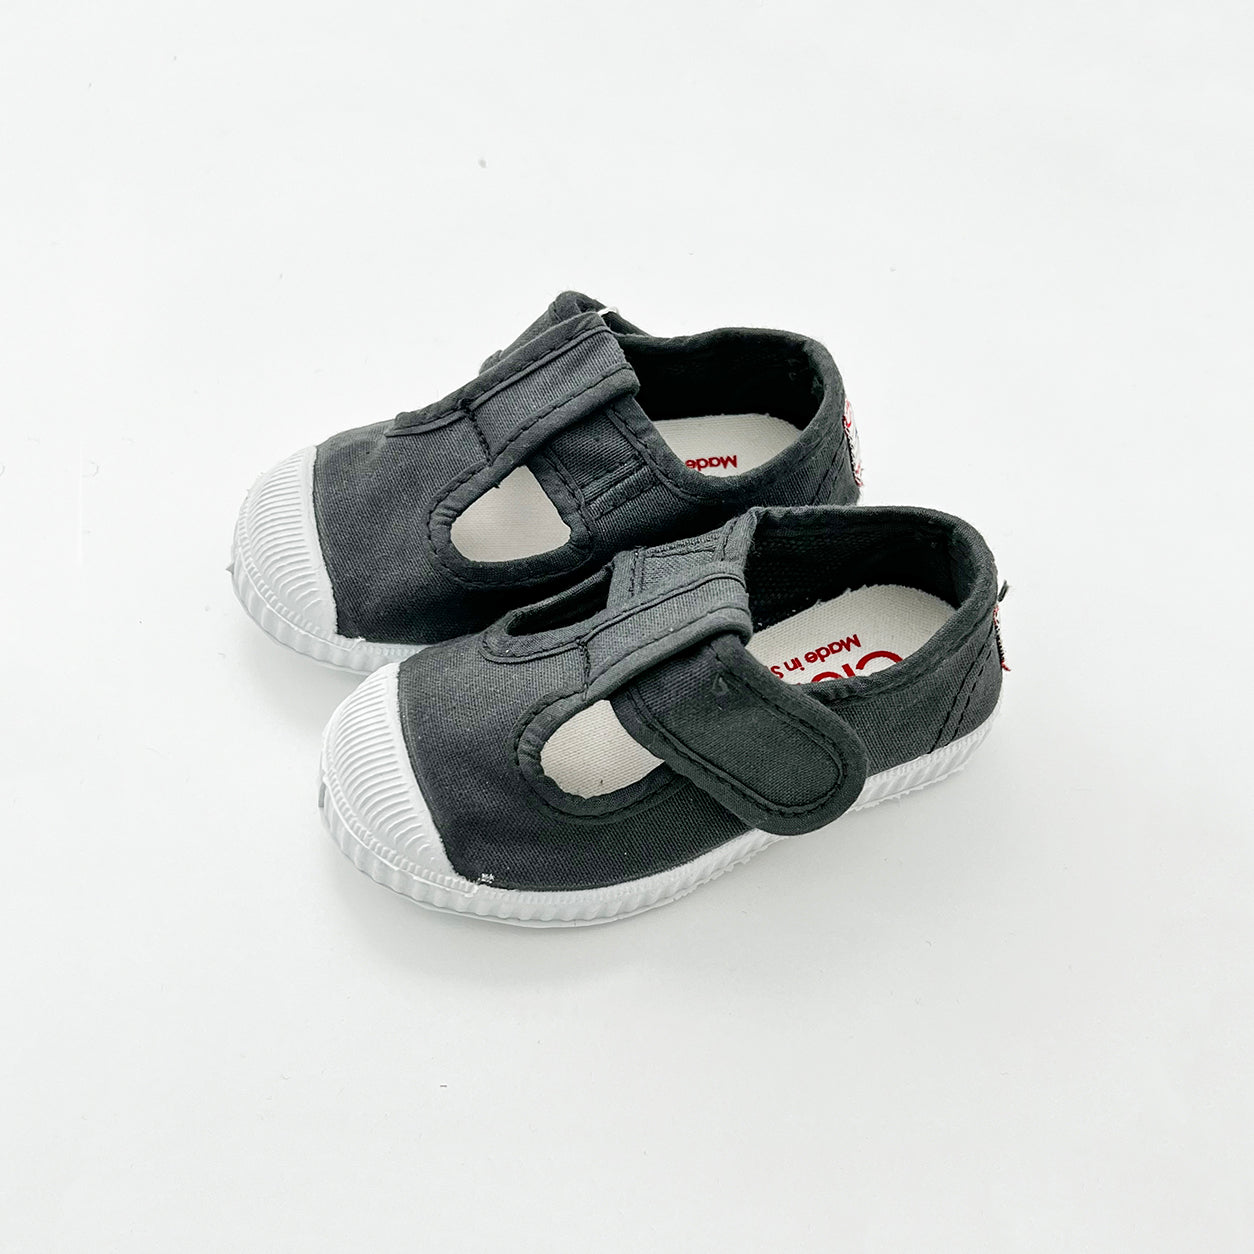 【Cienta】T strap shoes dyed Antracite Tストラップシューズ 墨黒 size21-29  | Coucoubebe/ククベベ